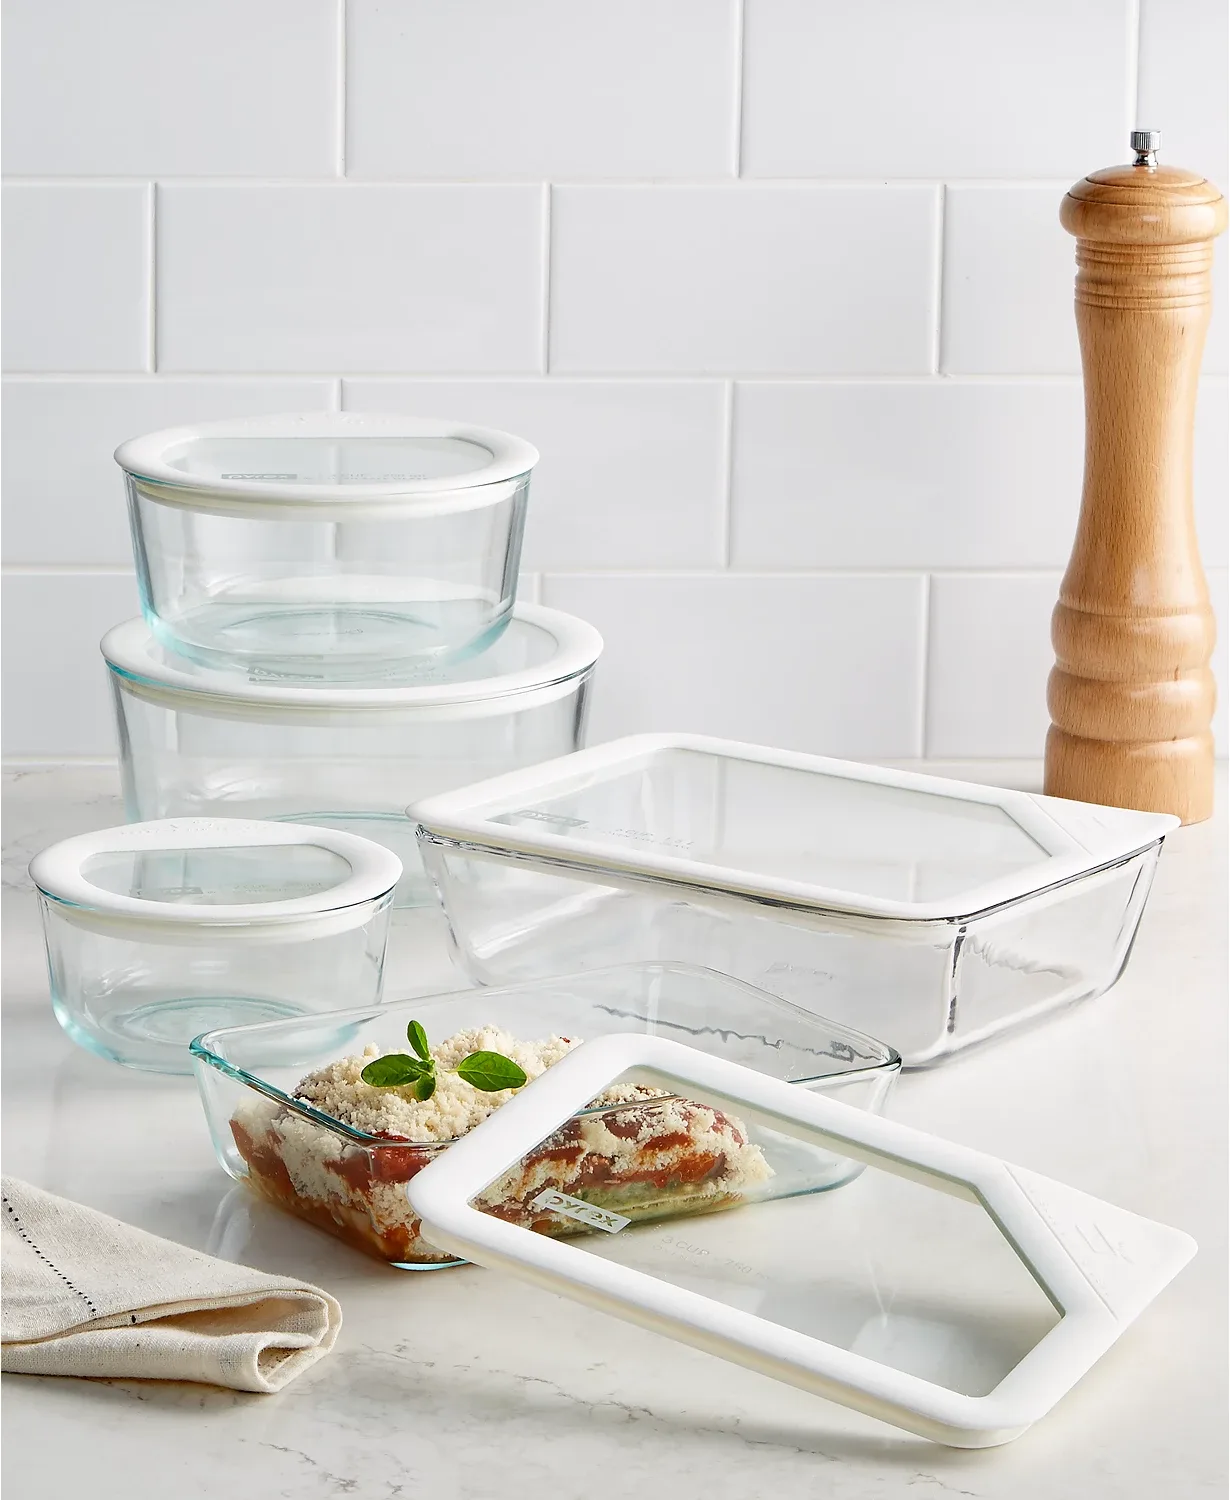 Pyrex Freshlock 10-pc. Glass Meal Prep Container Set